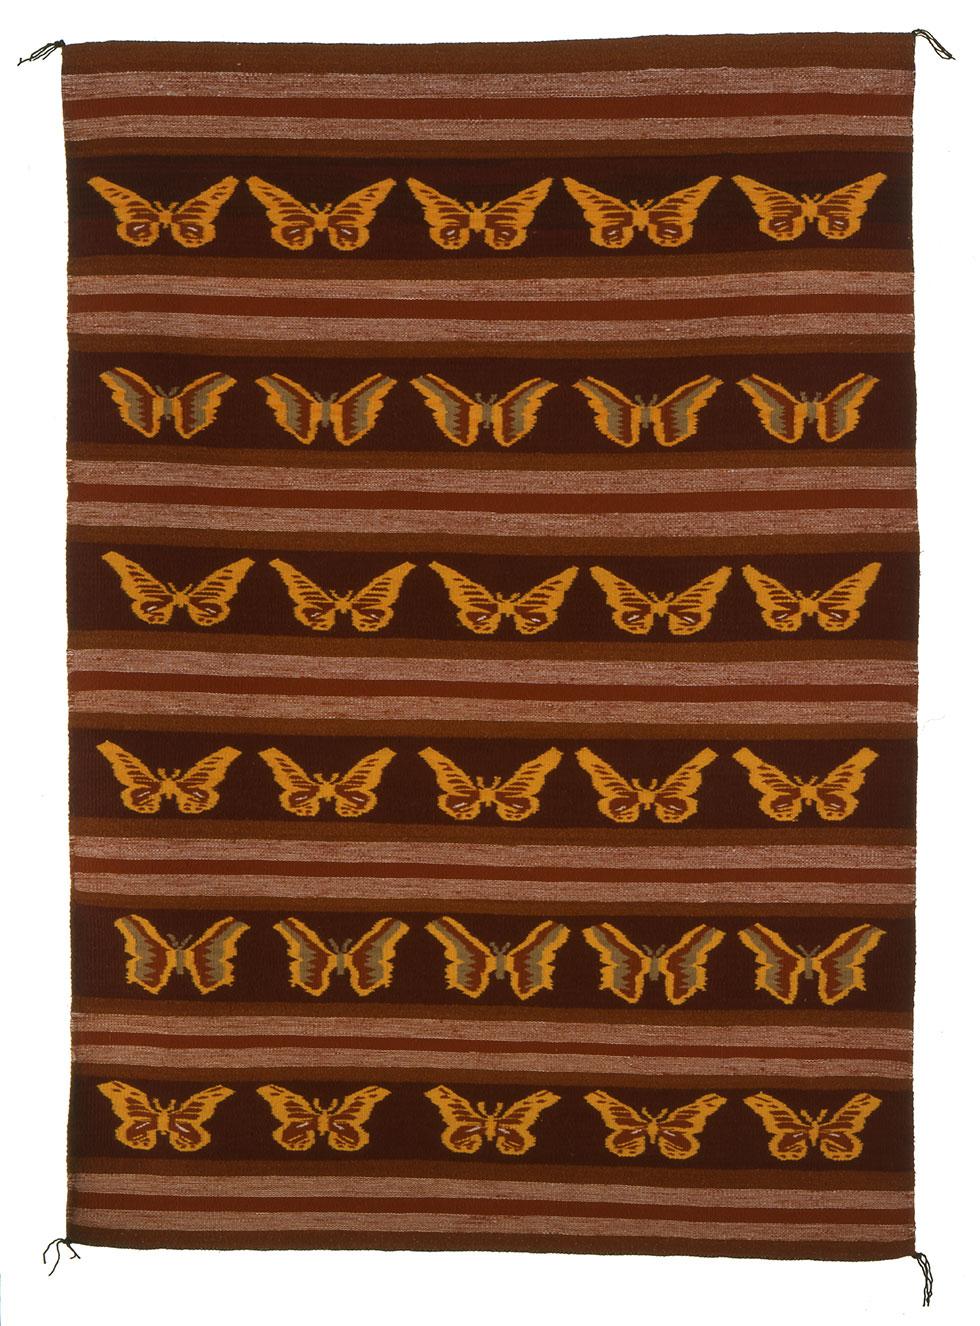 Butterfly Pattern Rug Crystal Pictorial, c.1981, Katie Wauneka, 72 x 50in (182.8 x 127cm), 91.023.96. Gift of Edwin L. and Ruth E. Kennedy.